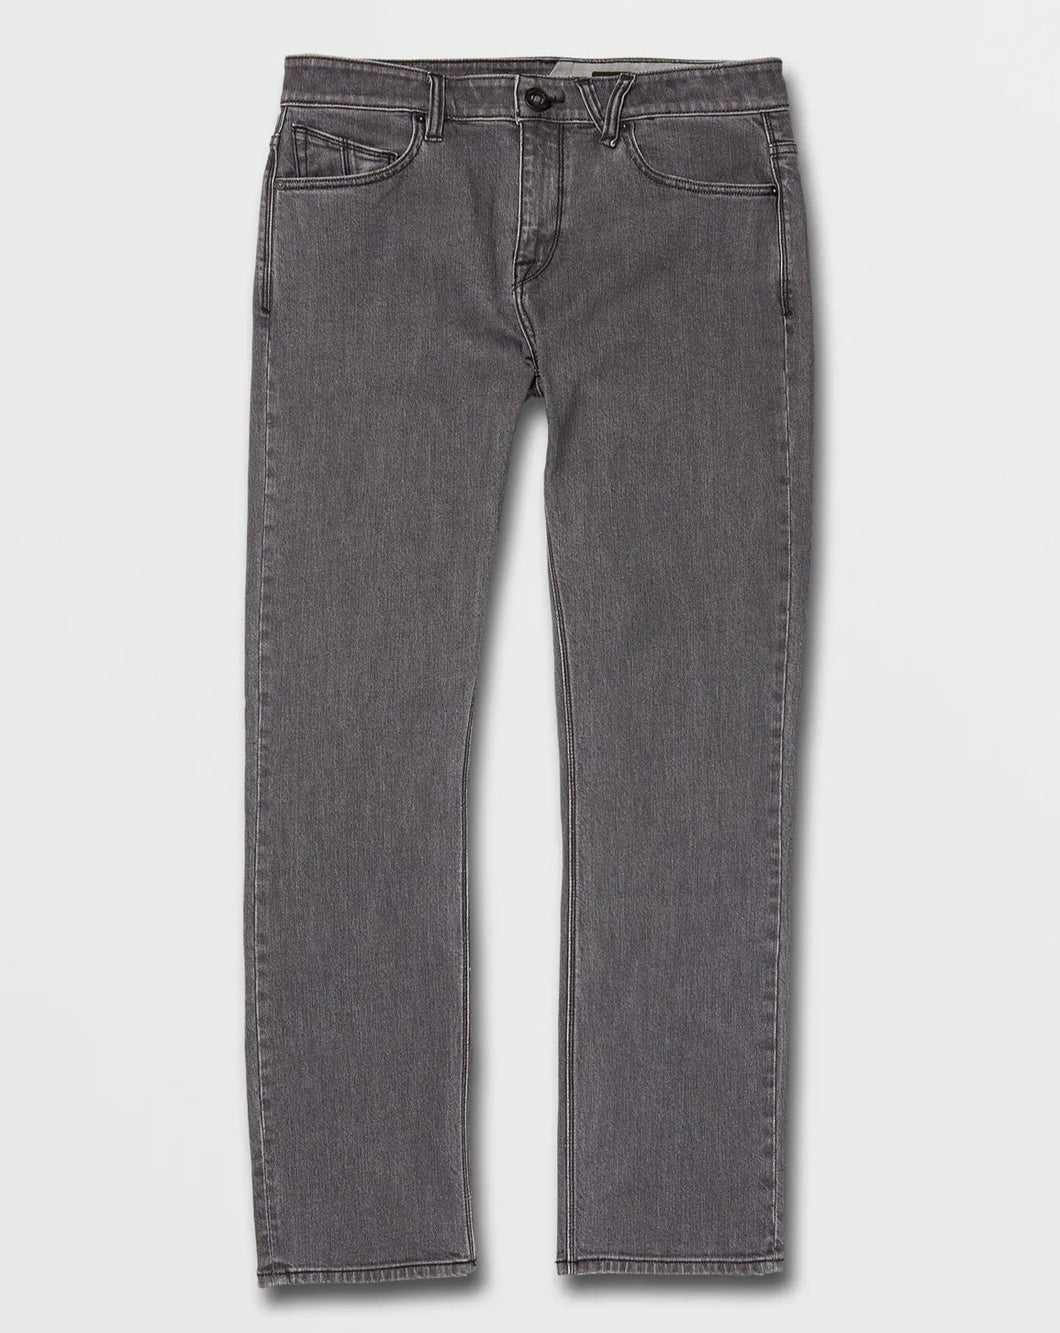 SOLVER MODERN FIT JEANS - EASY ENZYME GREY